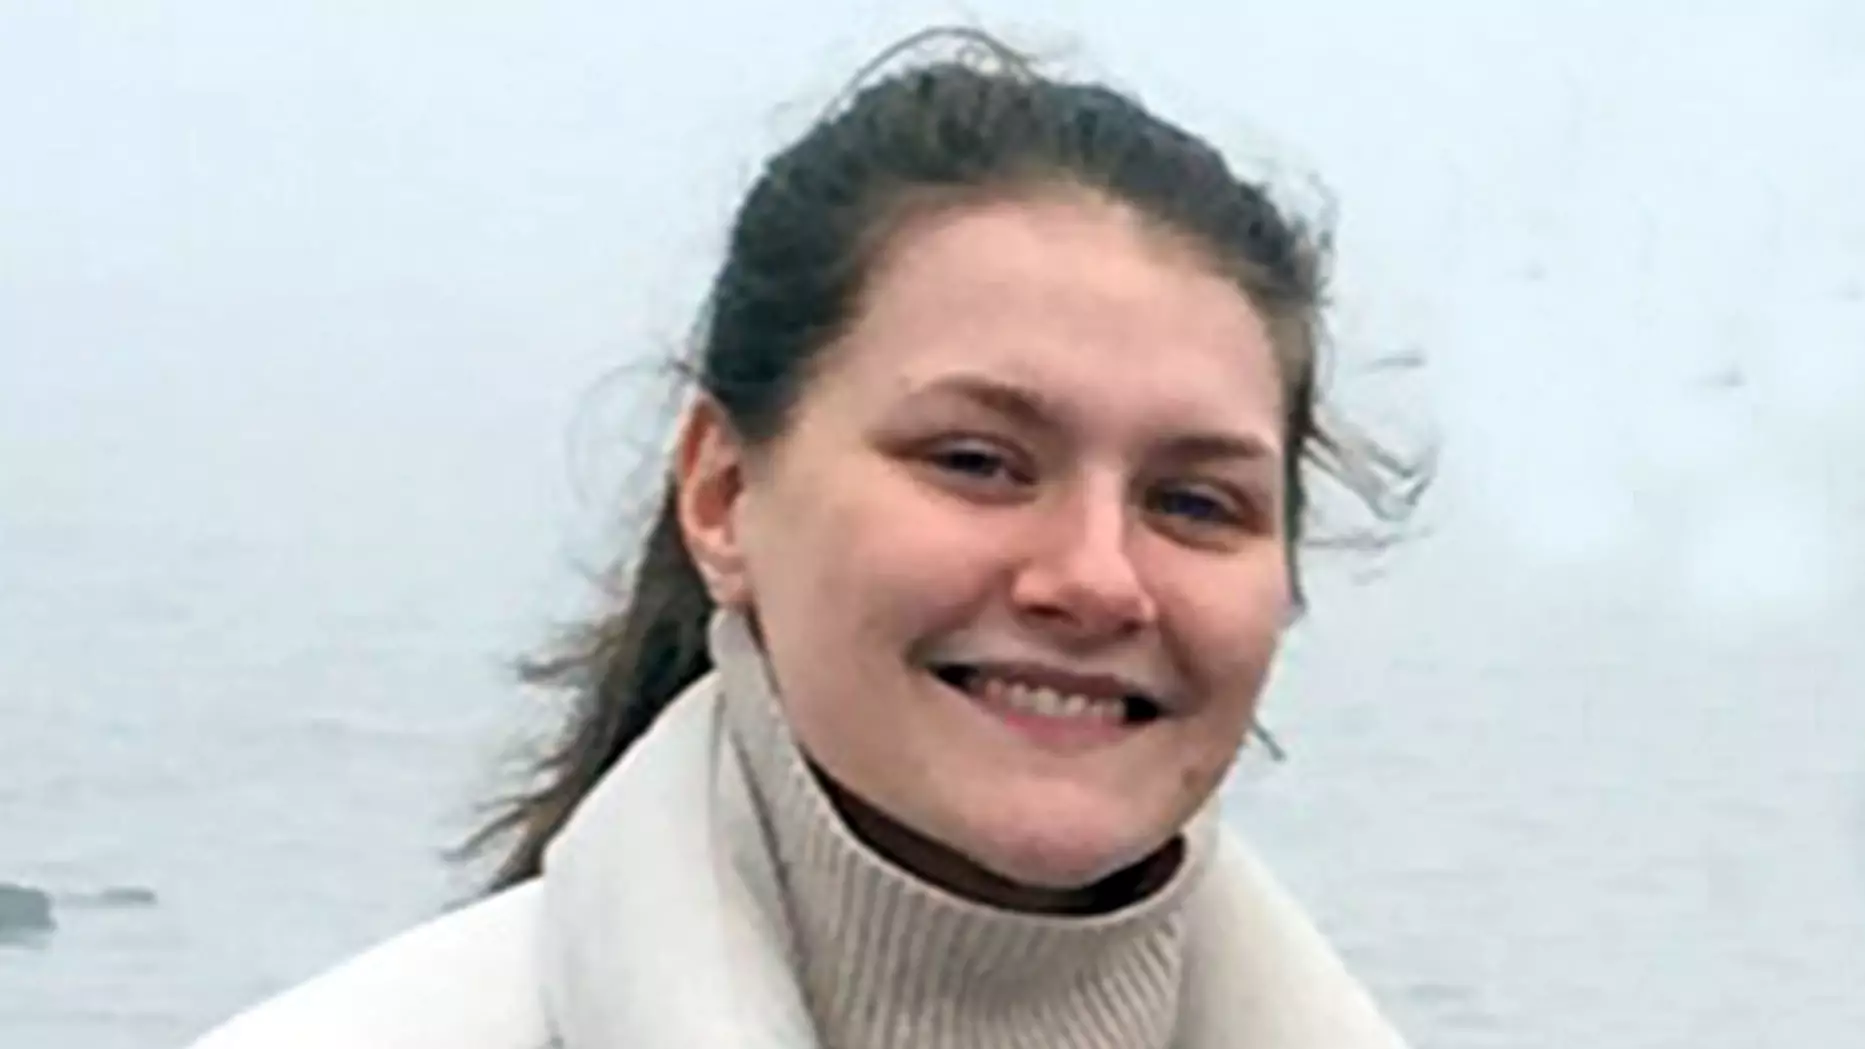 Libby Squire Murder Suspect Pawel Relowicz 'Stalked' Vulnerable Student Before Attacking